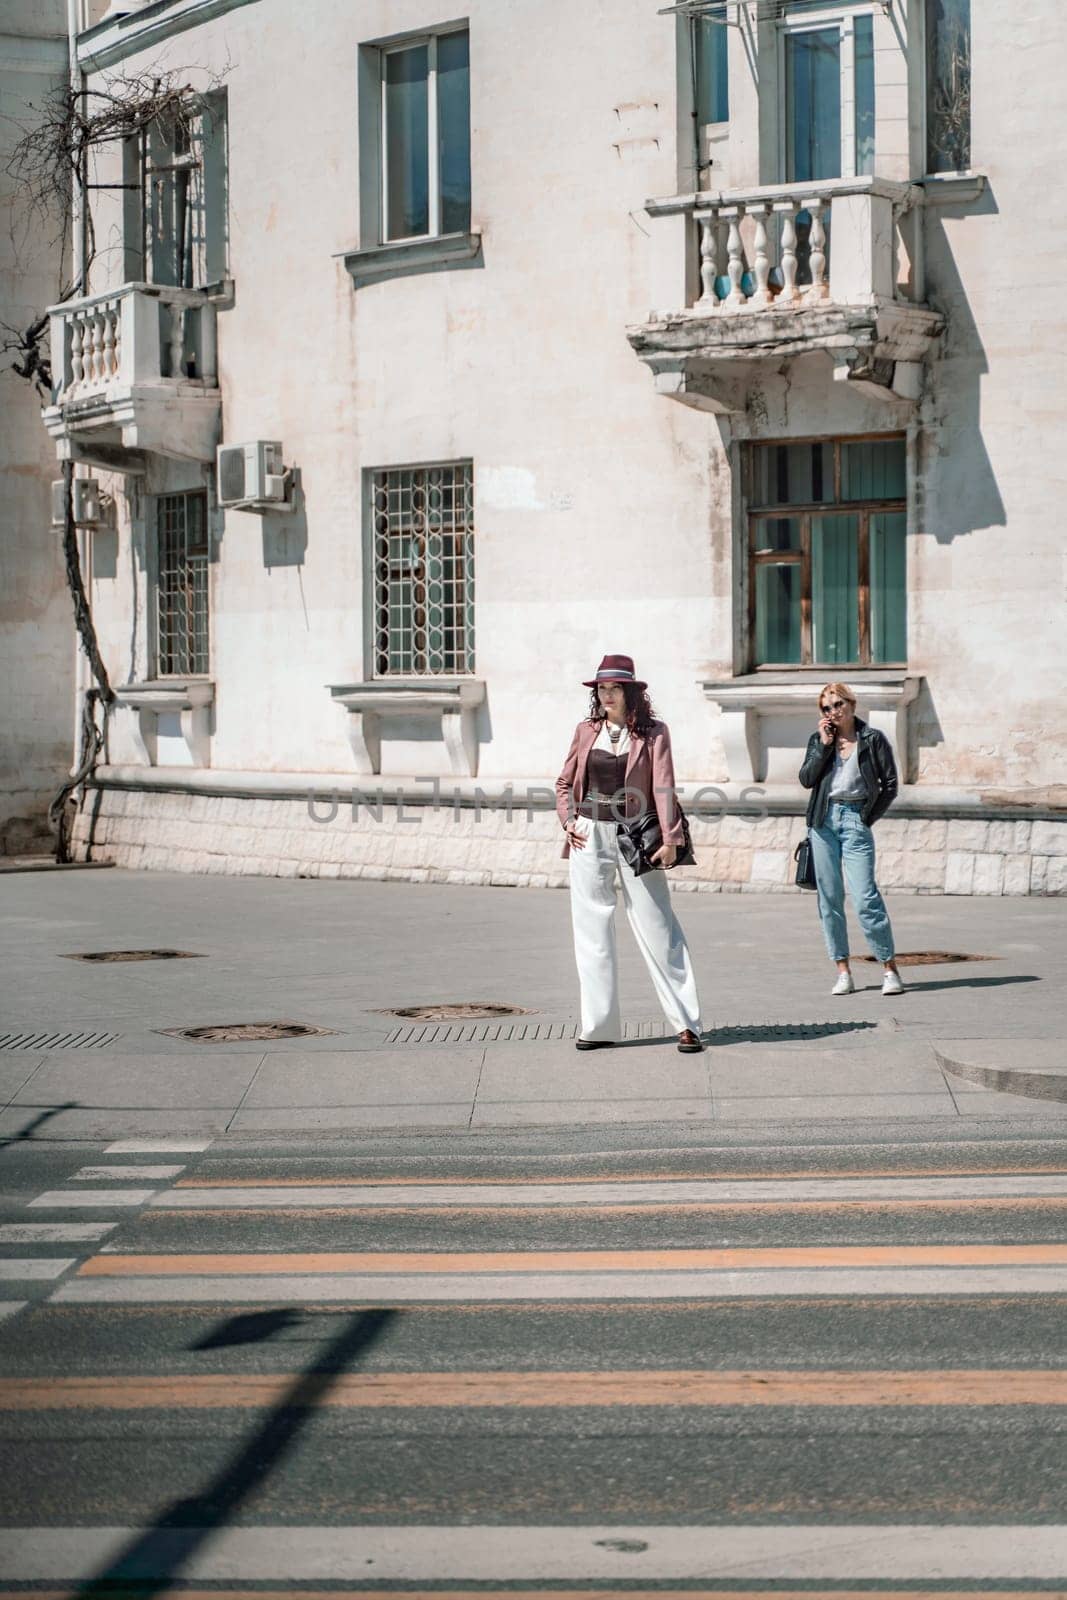 Woman city road crossing. Stylish woman in a hat crosses the road at a pedestrian crossing in the city. Dressed in white trousers and a jacket with a bag in her hands. by Matiunina